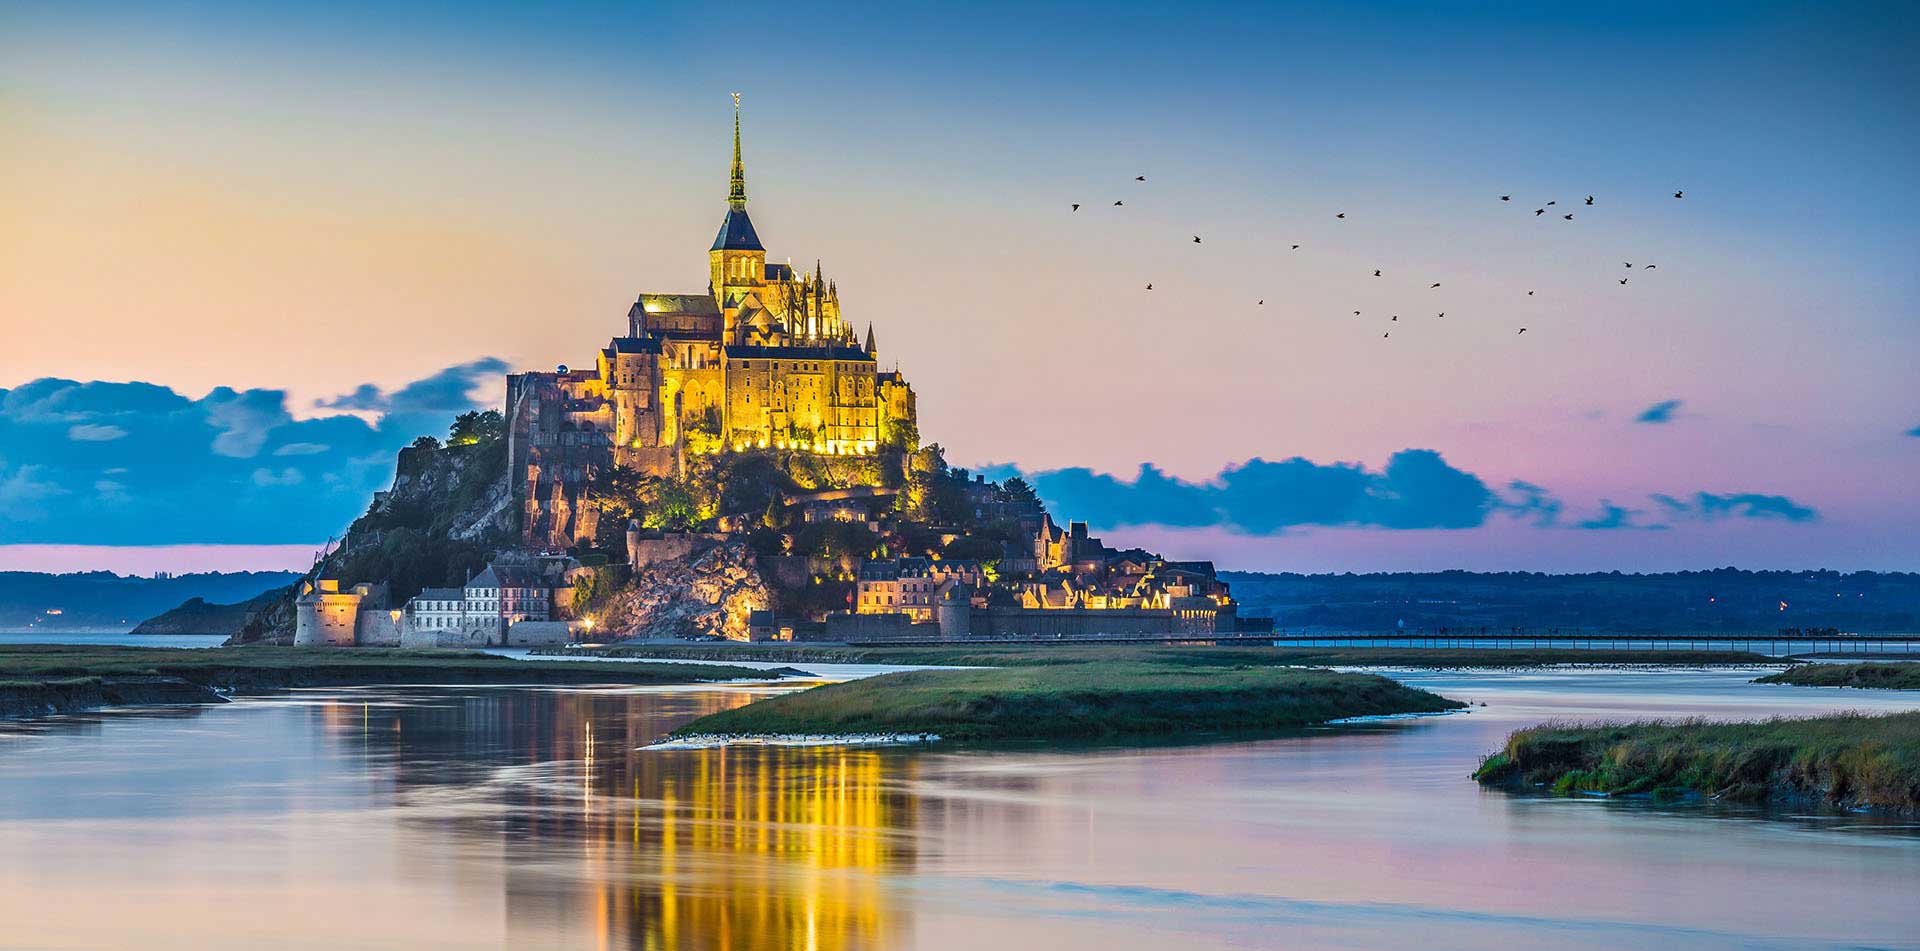 Mont-Saint-Michel: How To Visit and What You'll See on the Island